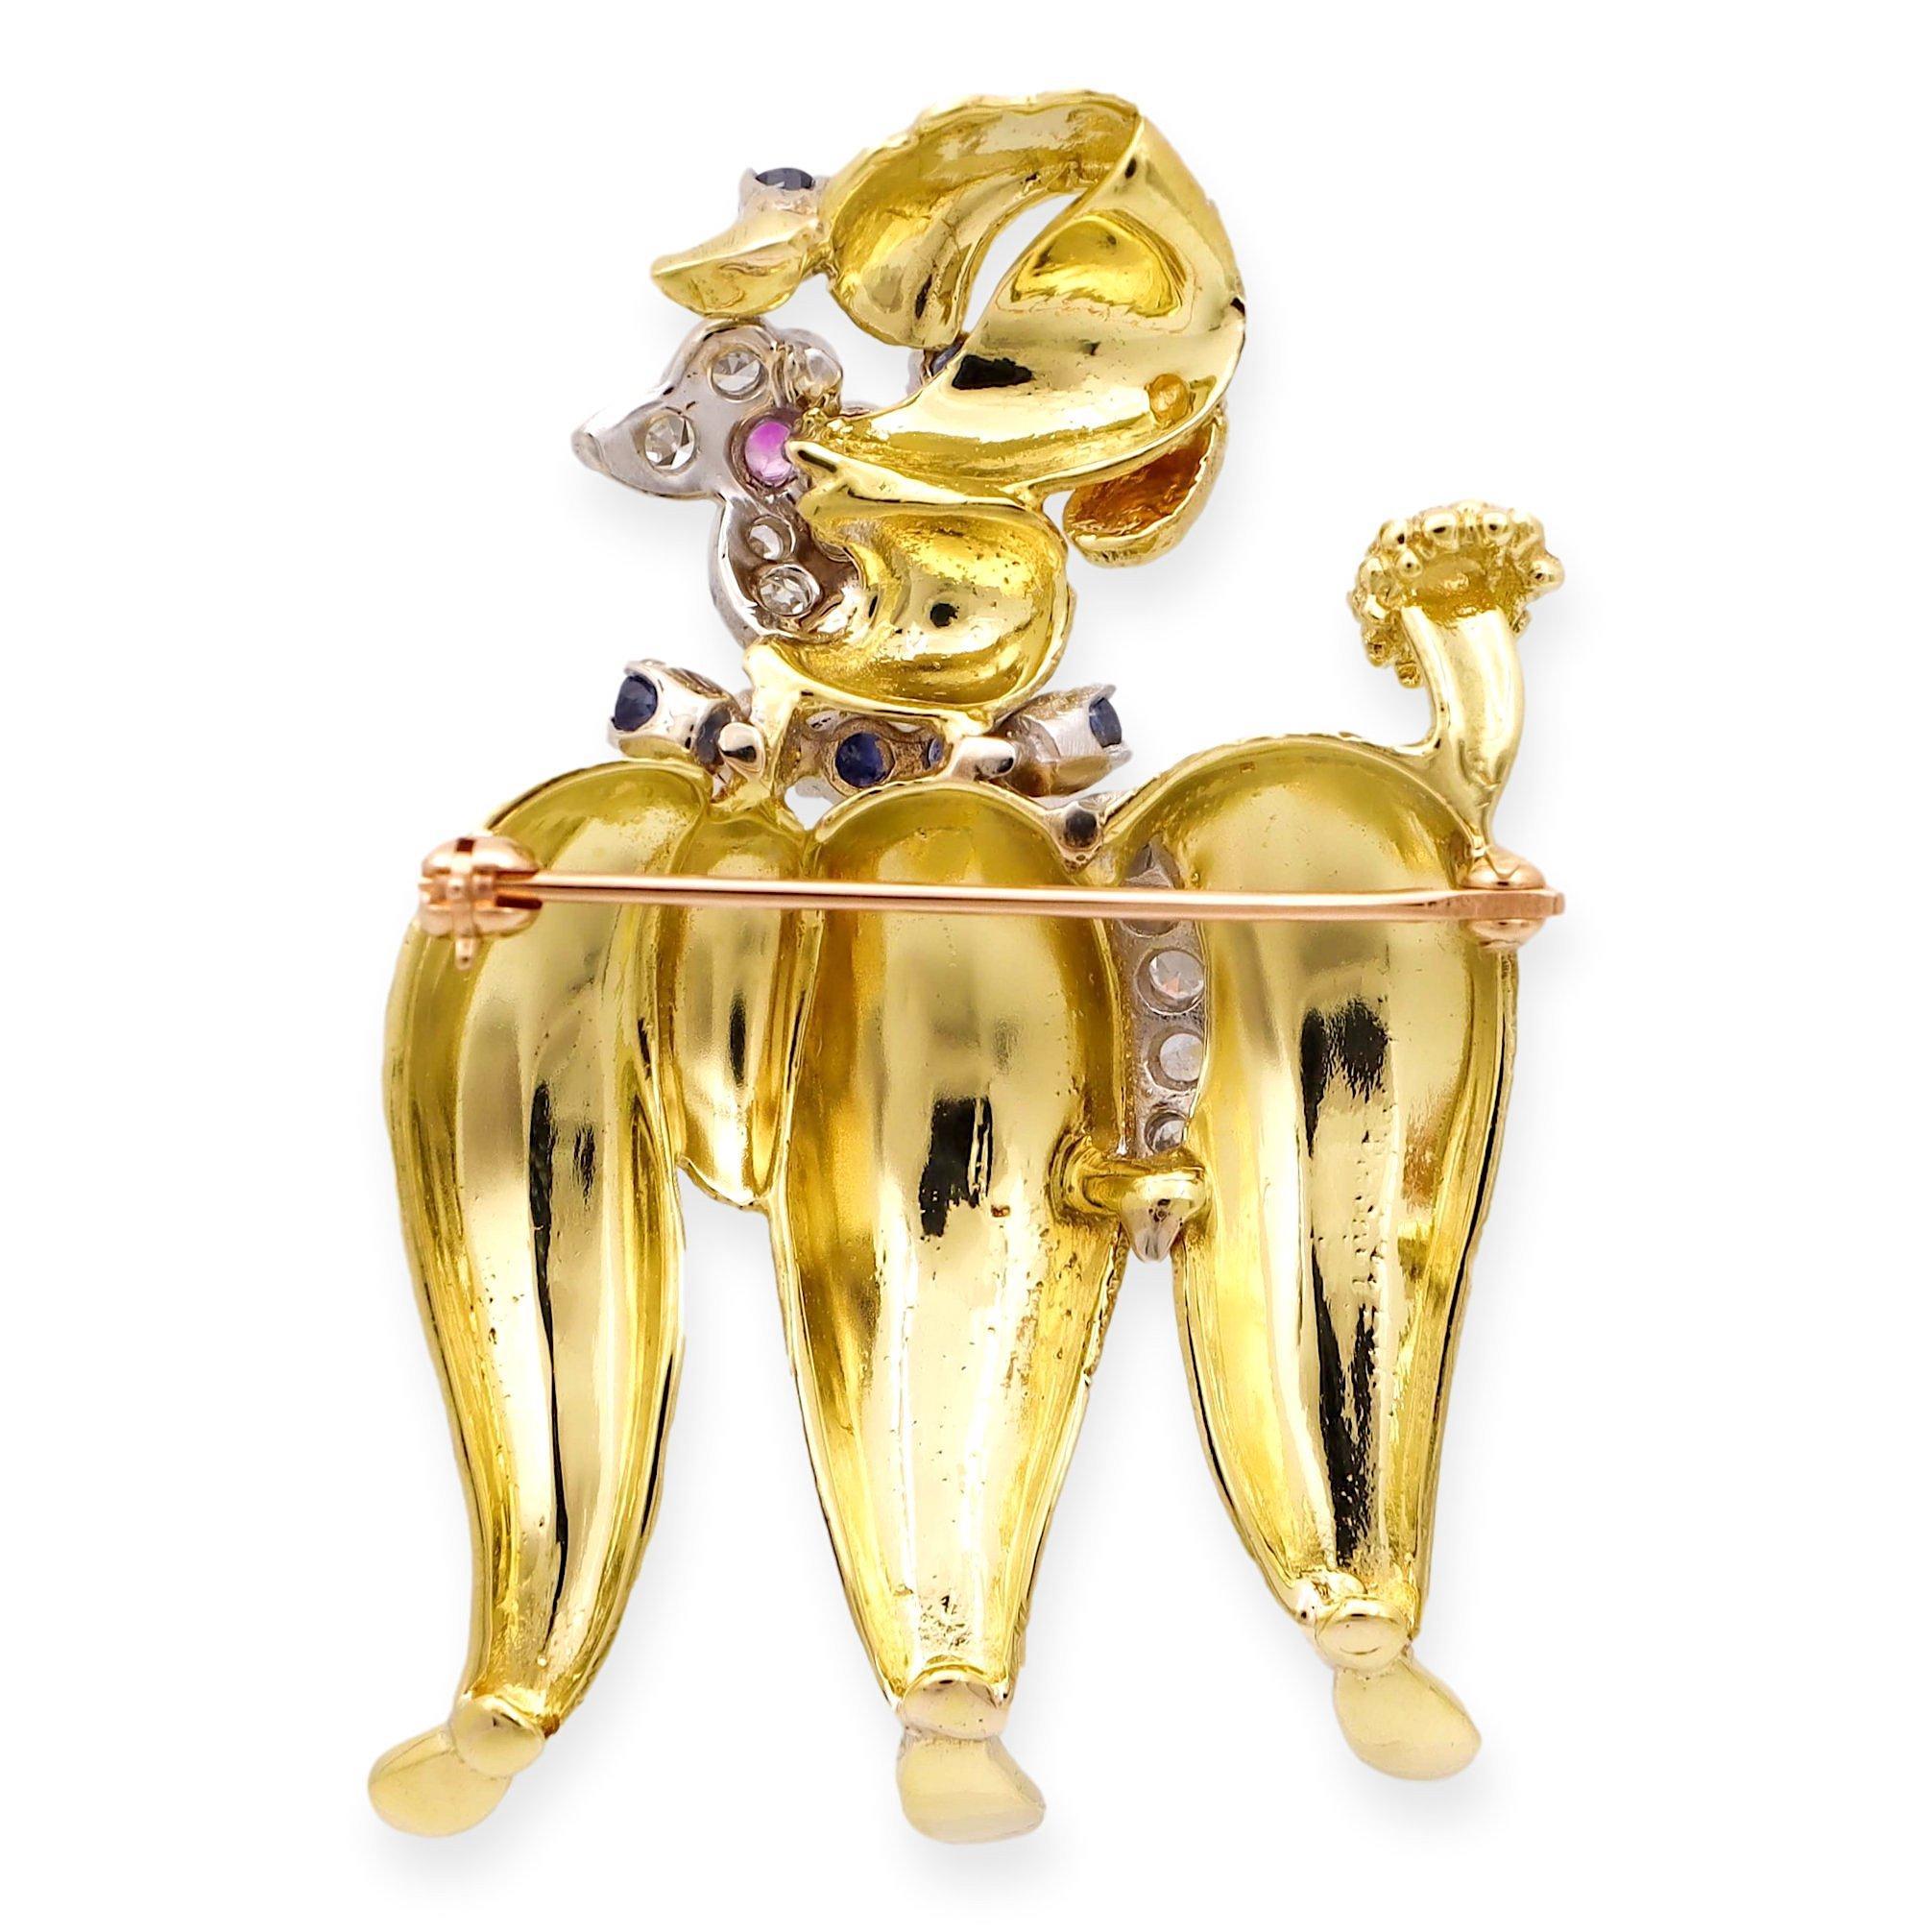 Vintage Poodle Motif Brooch, a delightful piece finely crafted in 14 karat yellow gold. This charming creation showcases a playful poodle motif adorned with a mix of single-cut diamonds, vibrant blue and pink sapphire embellishments, all set atop